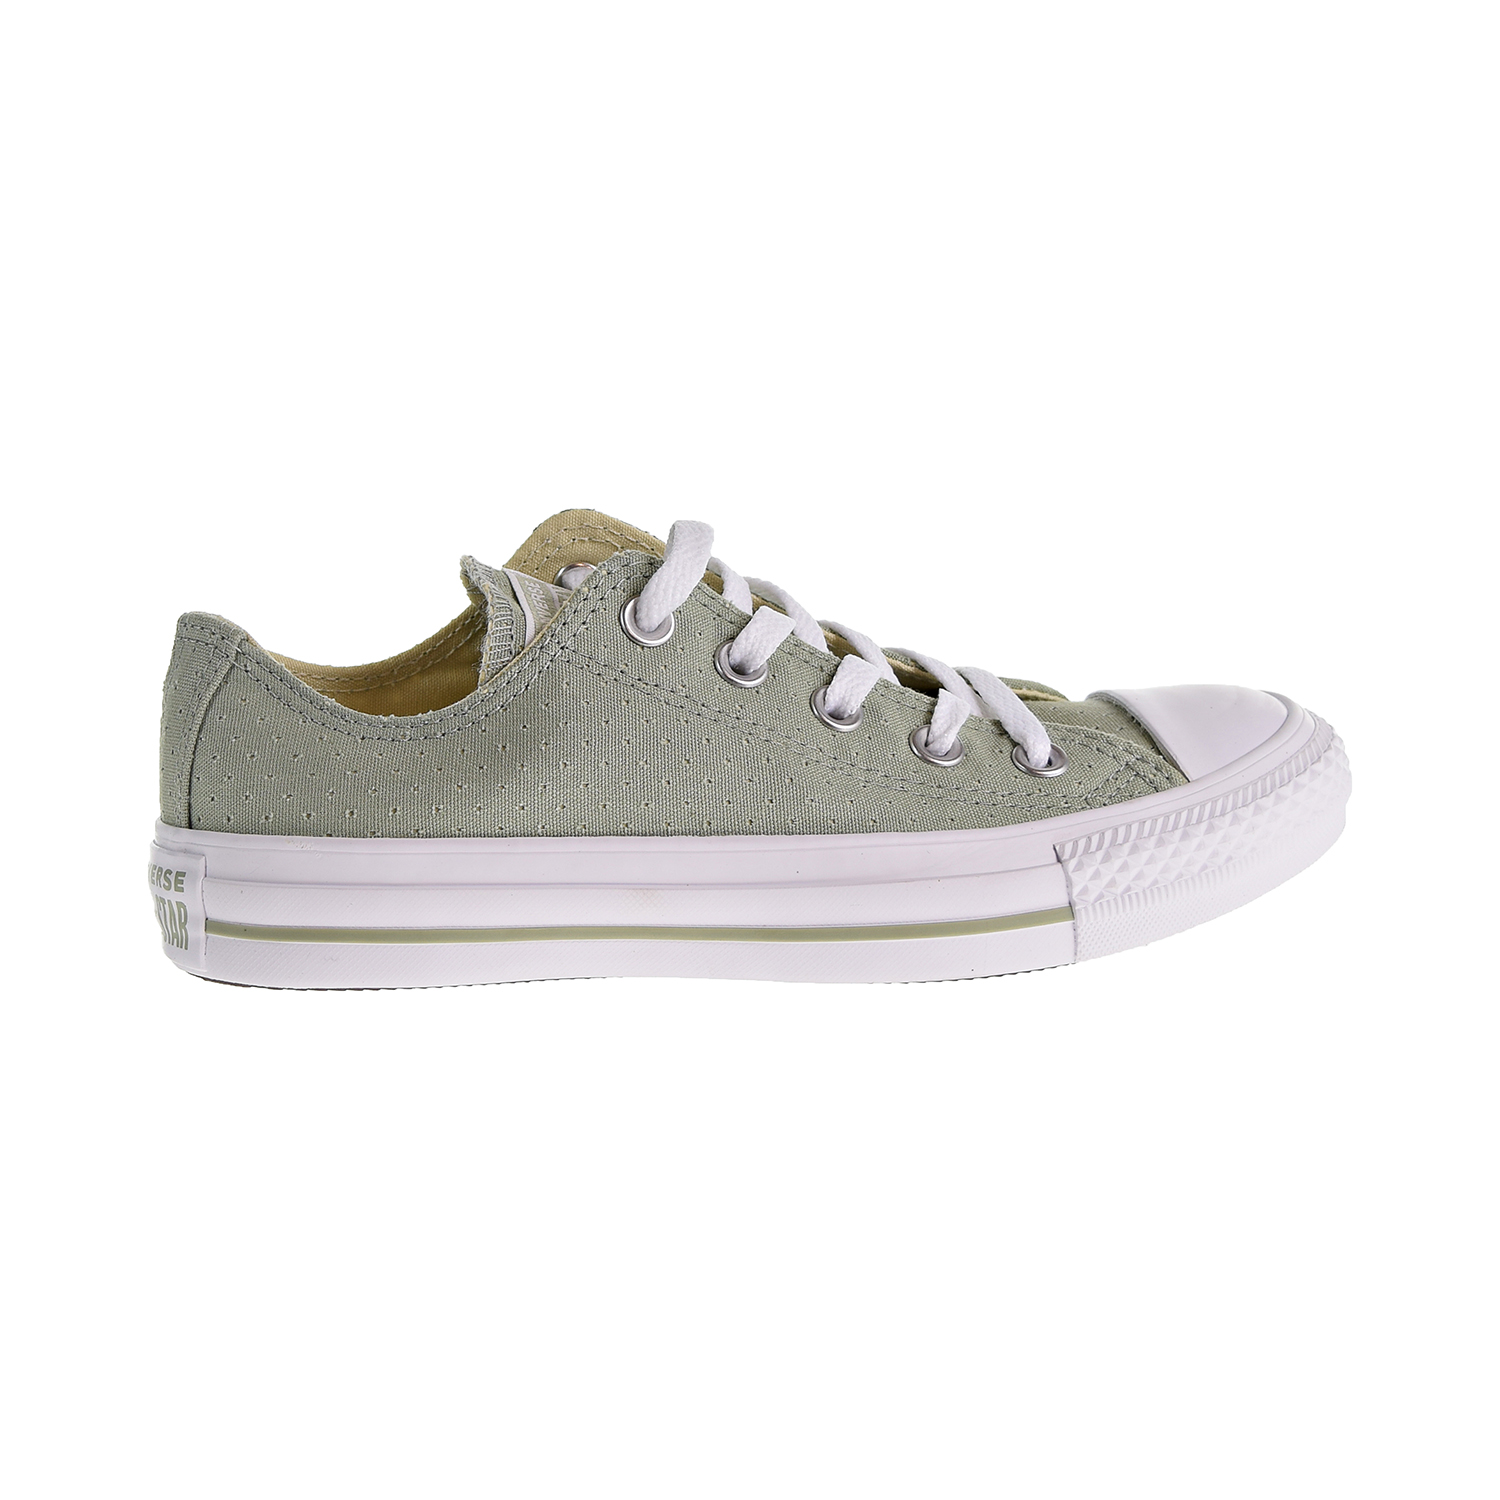 chuck taylor all star perforated low top